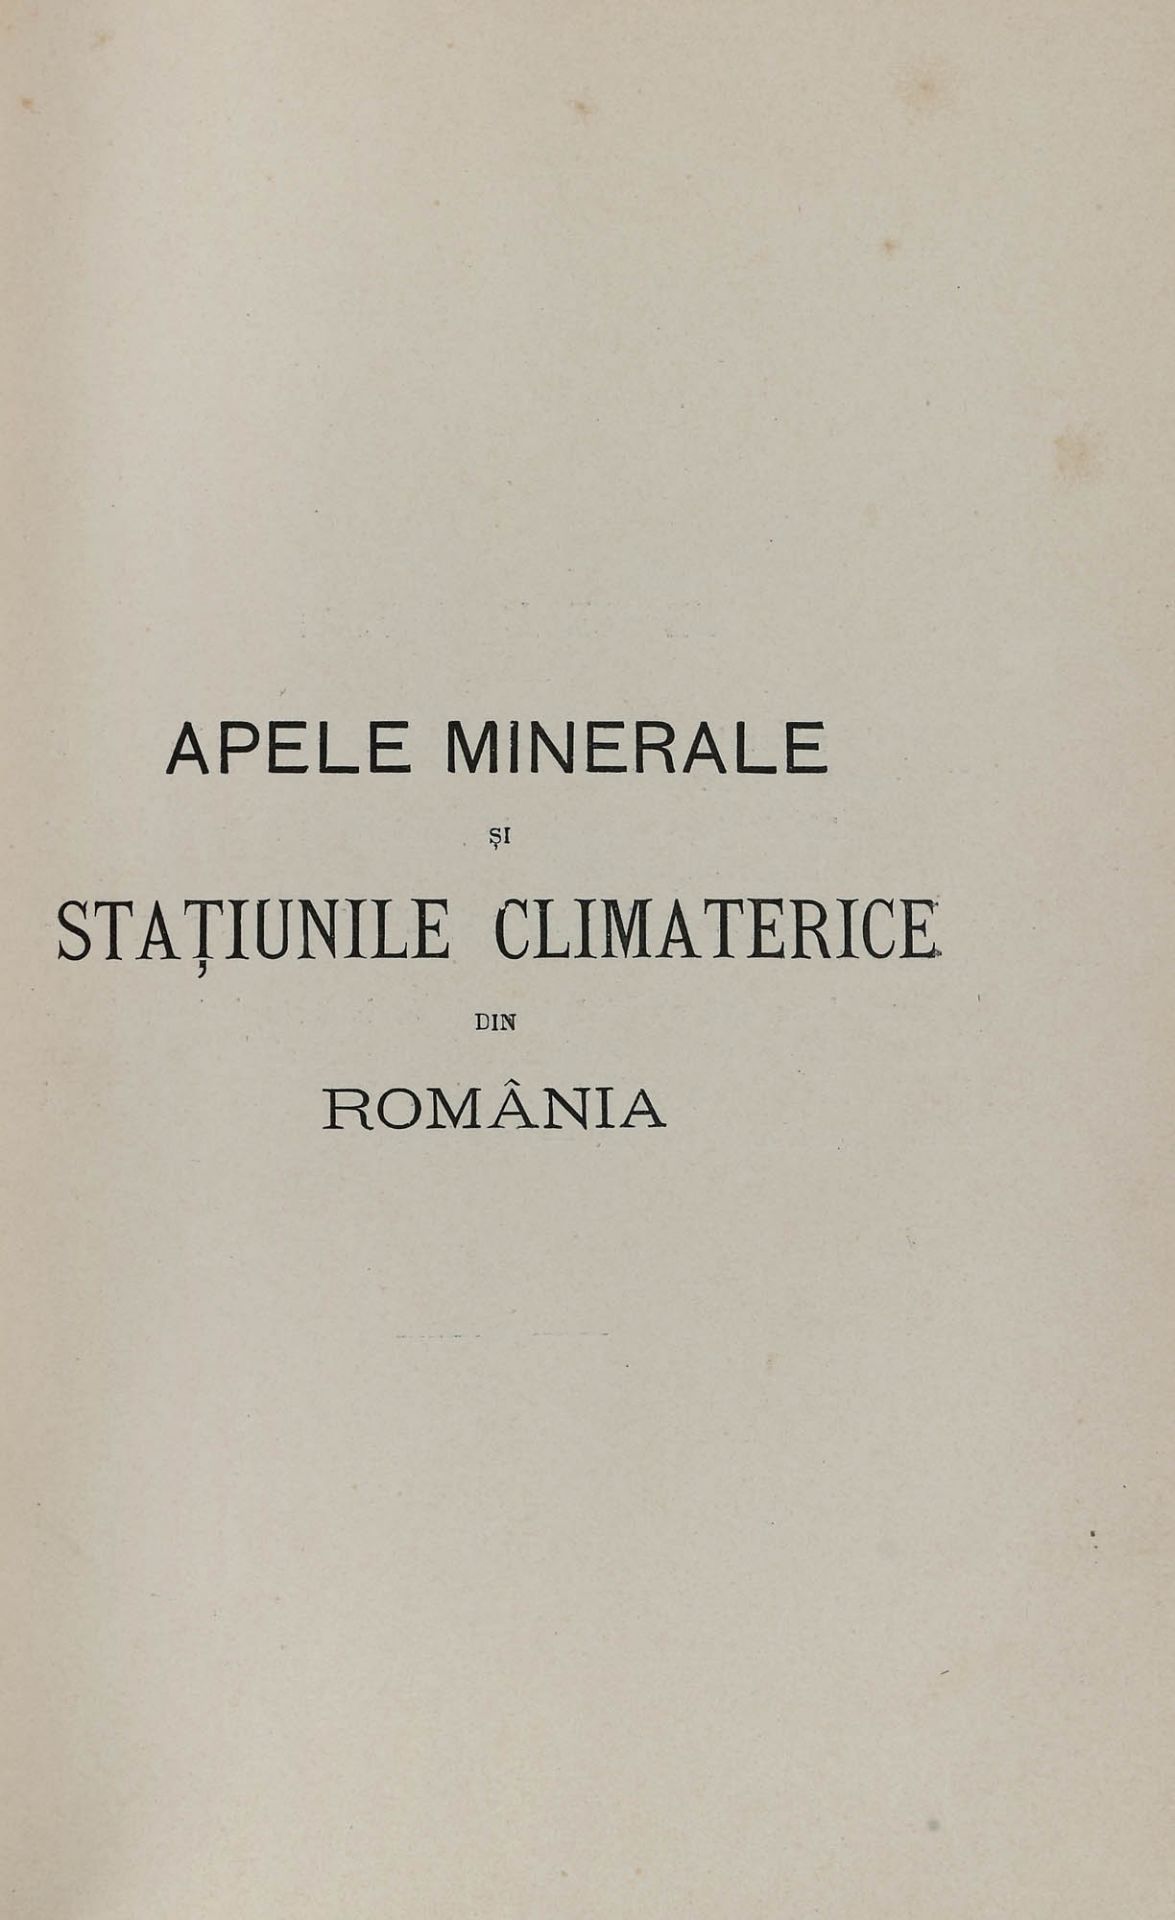 "Apele minerale și stațiunile climaterice din România" ("Mineral waters and climatic resorts in R - Bild 3 aus 5